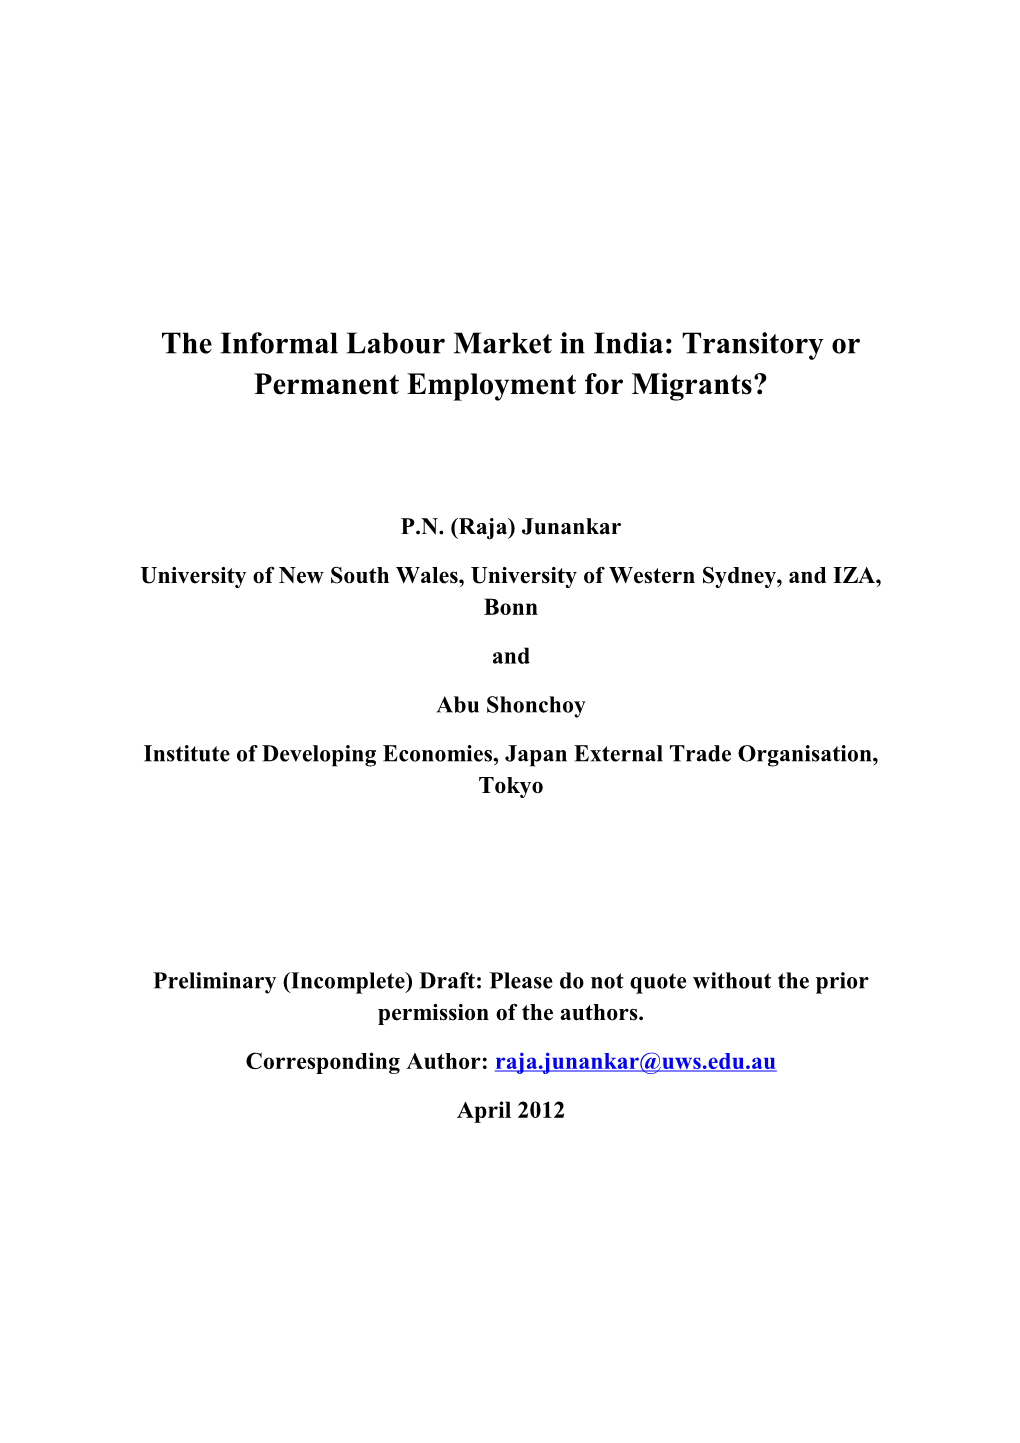 The Informal Labour Market in India: Transitory Or Permanent Employment for Migrants